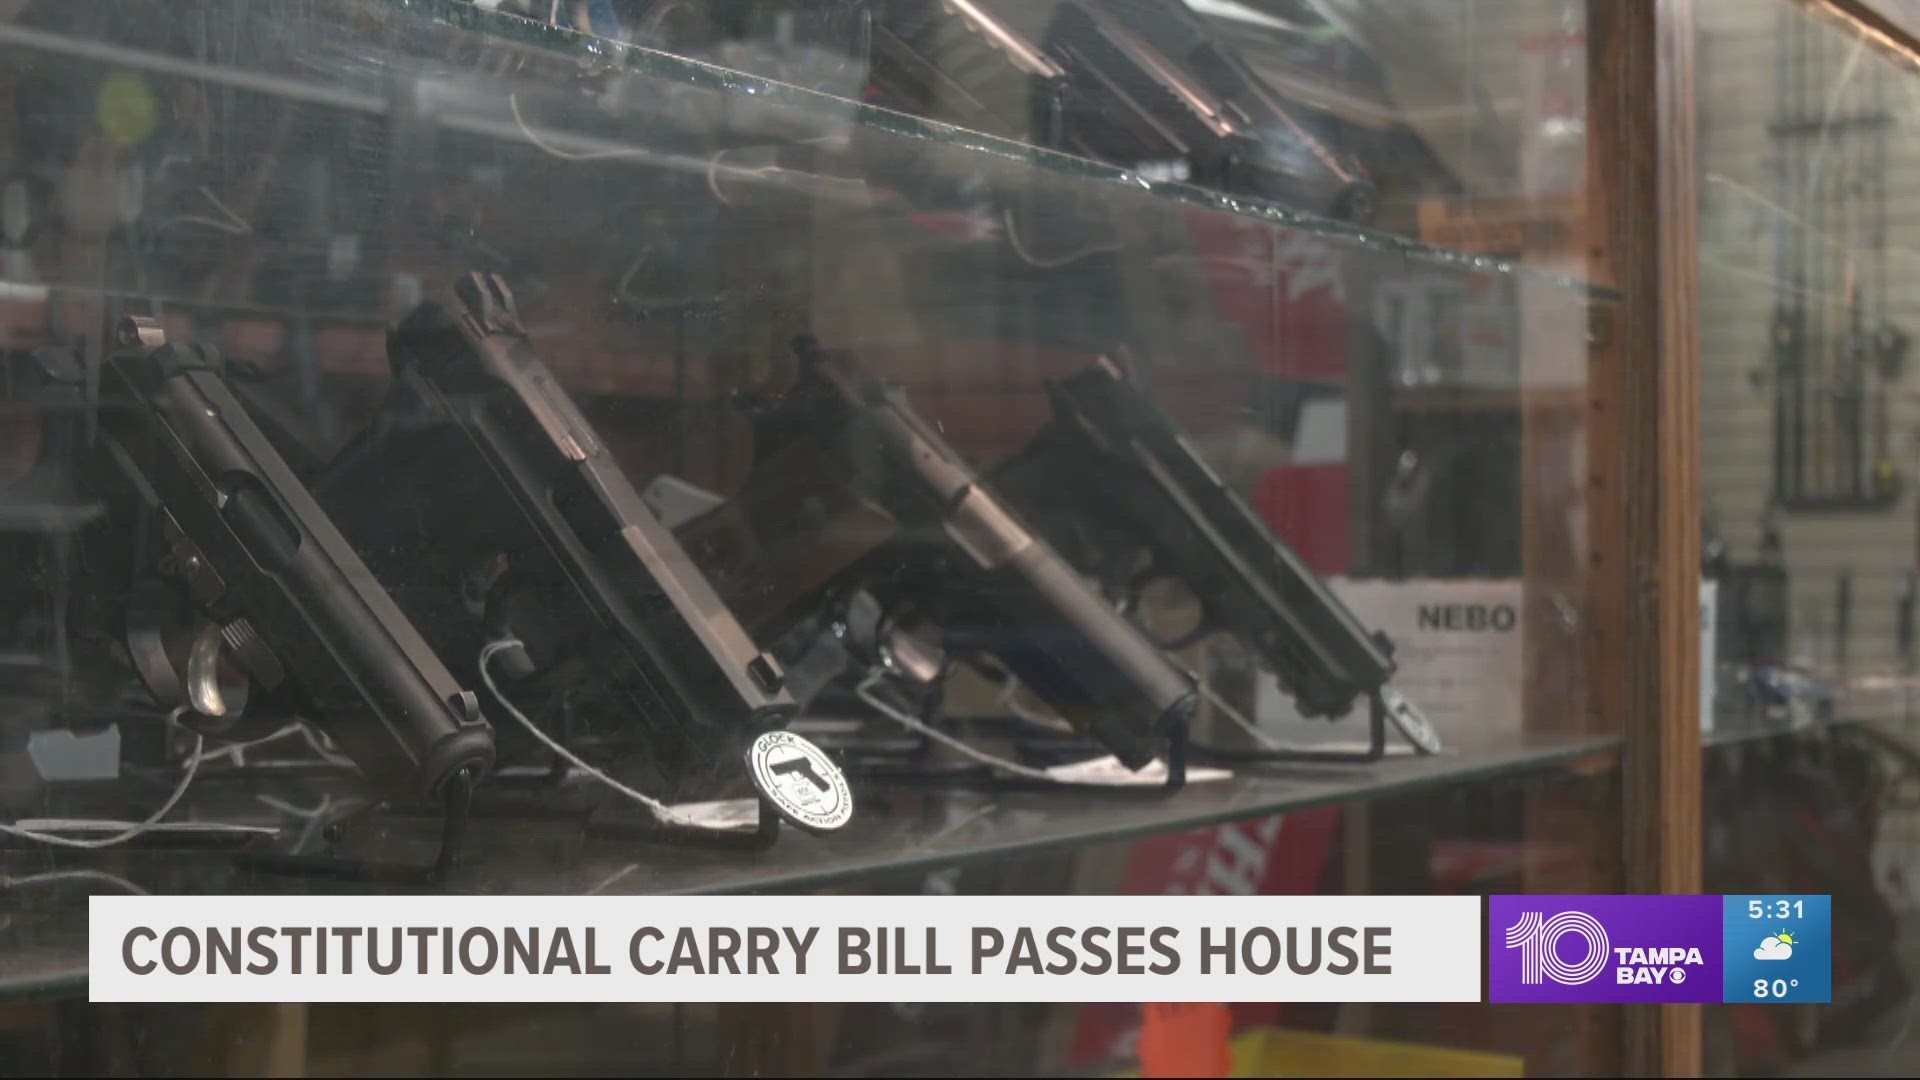 The bill would allow people to carry concealed firearms without going through the current licensing steps, including undergoing background screening.